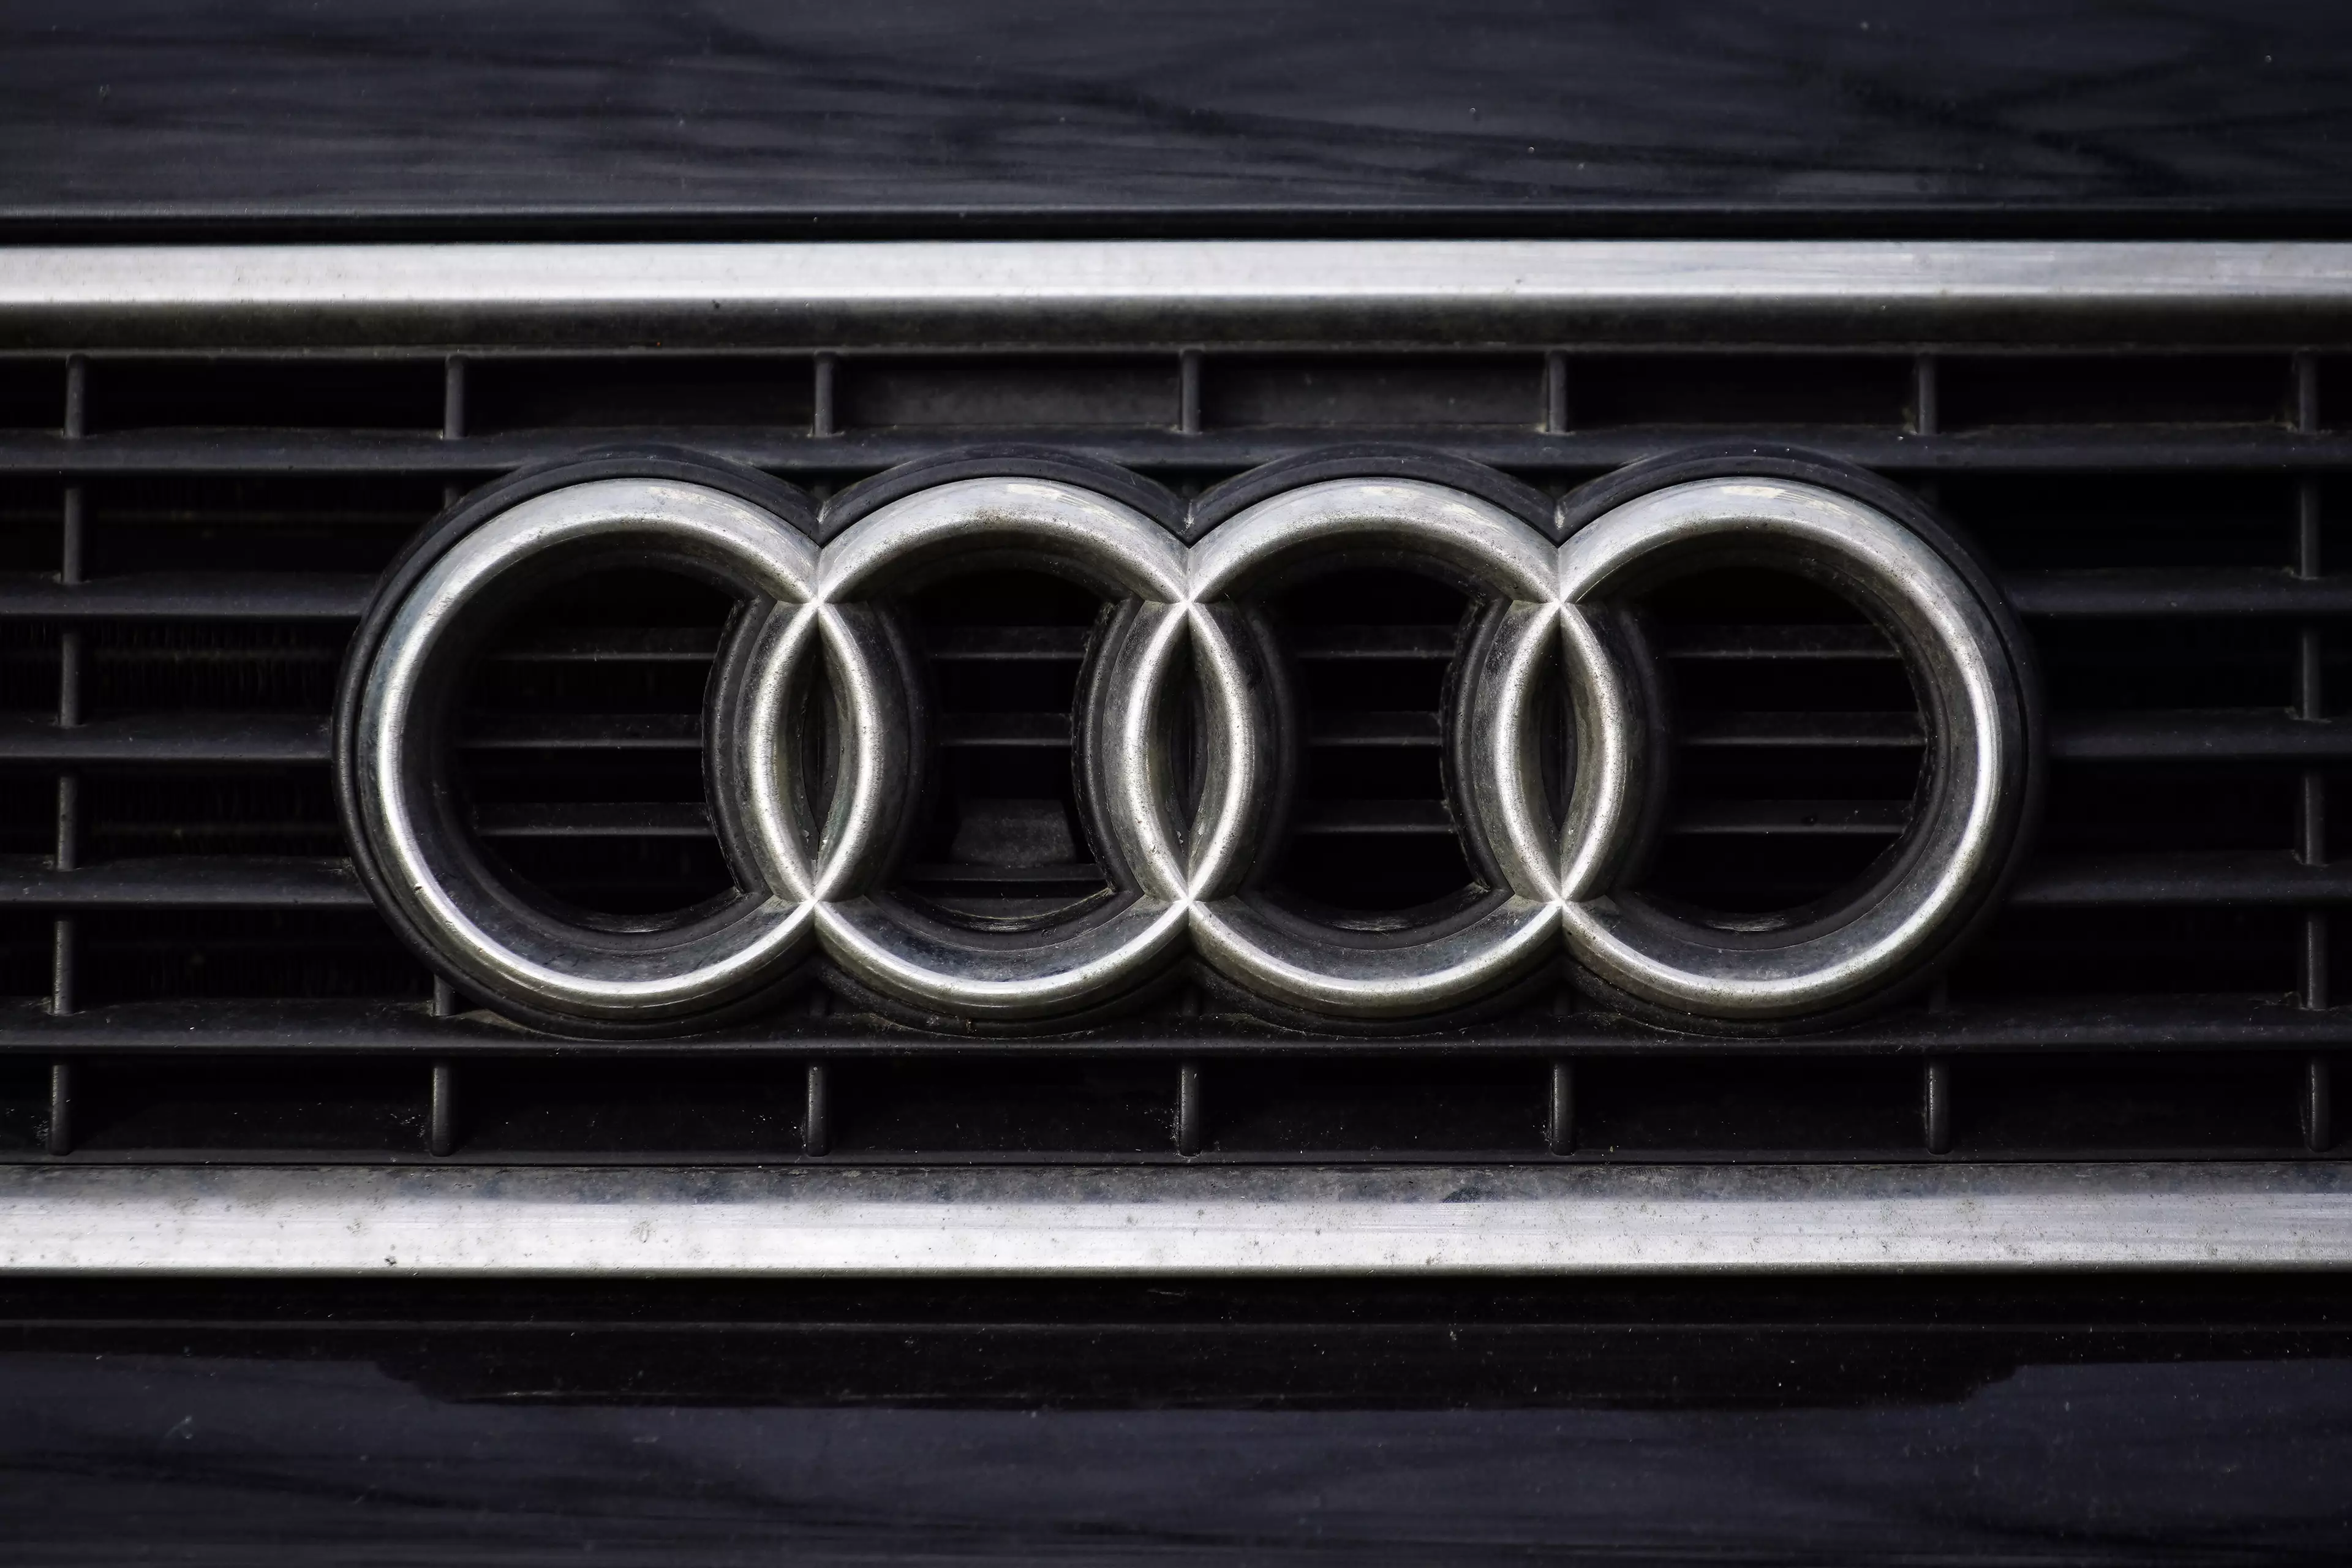 Audi drivers might not be as bad as suspected.